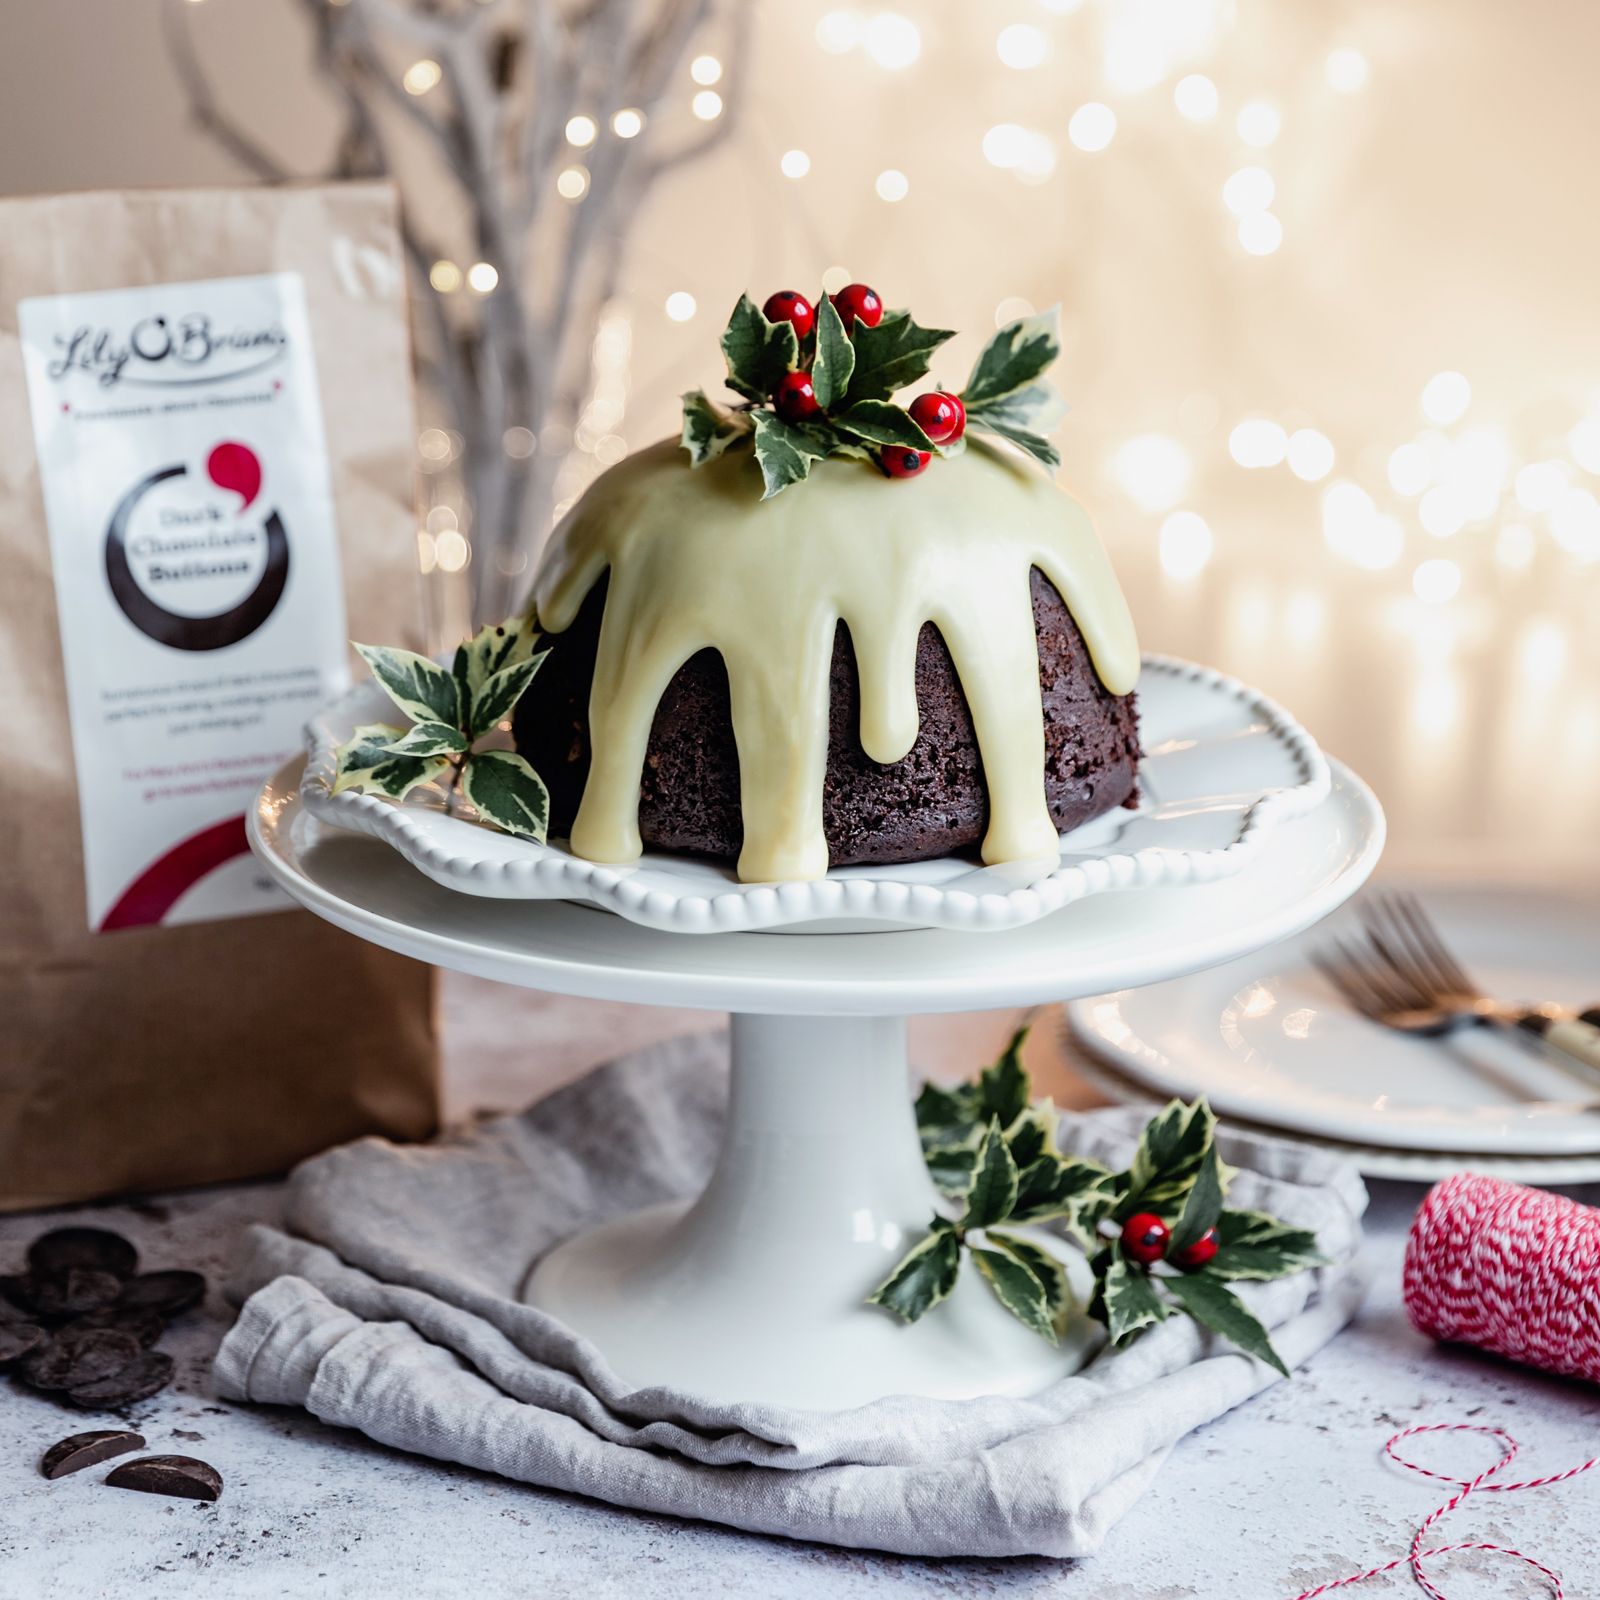 Recipe Chocolate Christmas Pudding by Lily O'Brien's